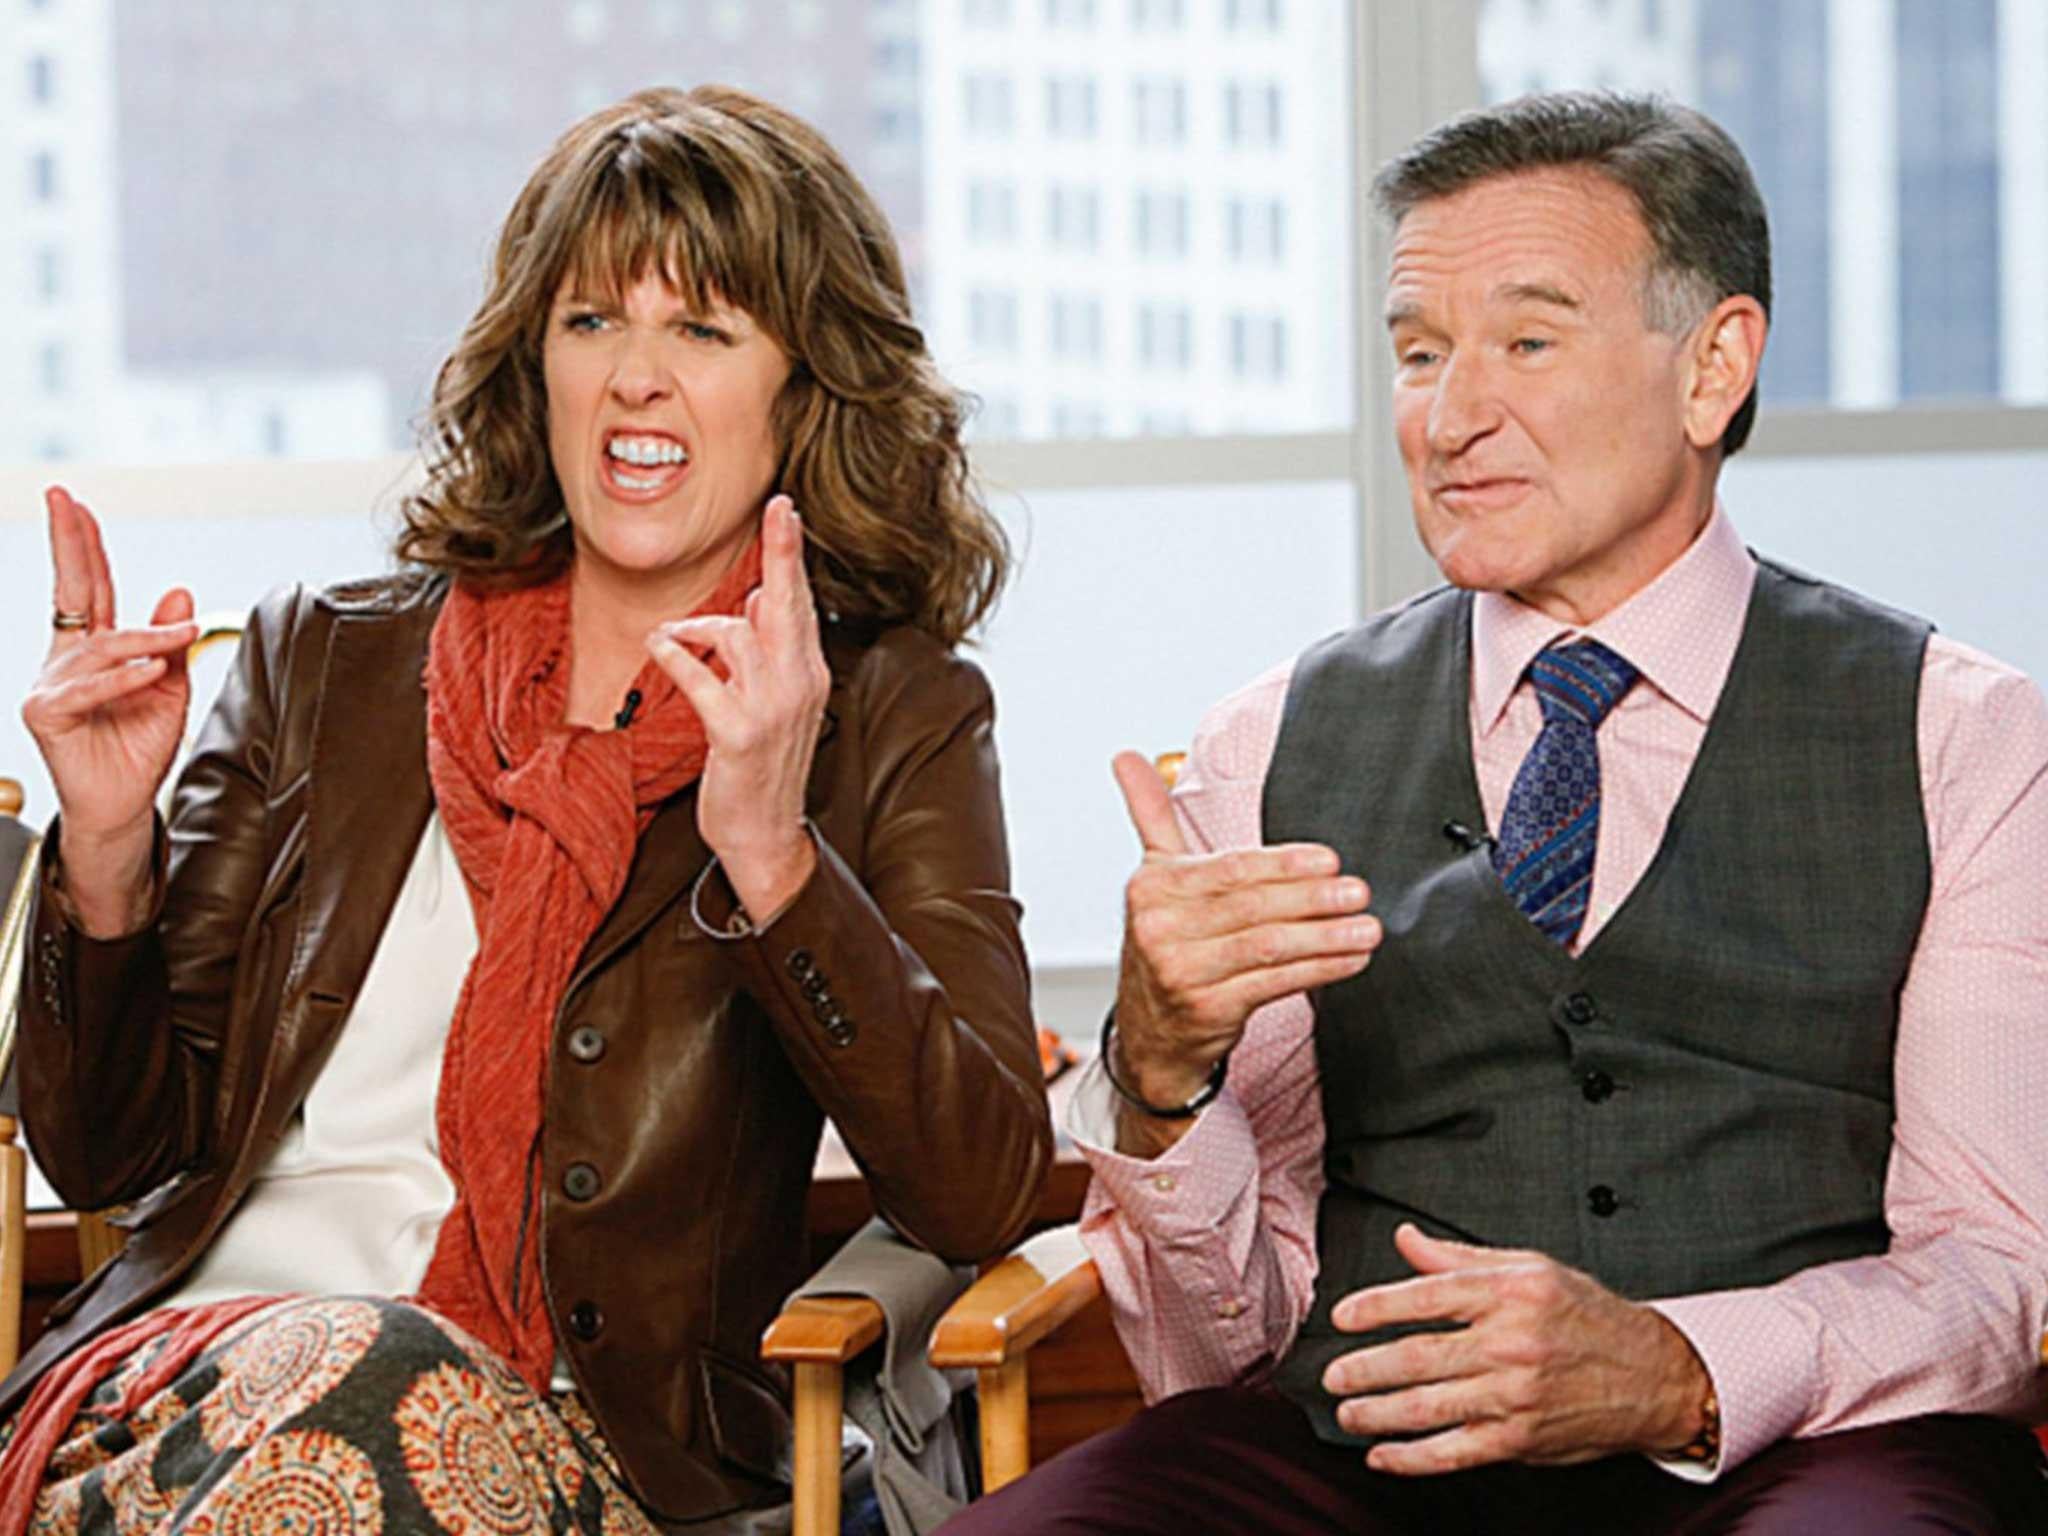 Robin Williams with his Mork and Mindy co-star Pam Dawber